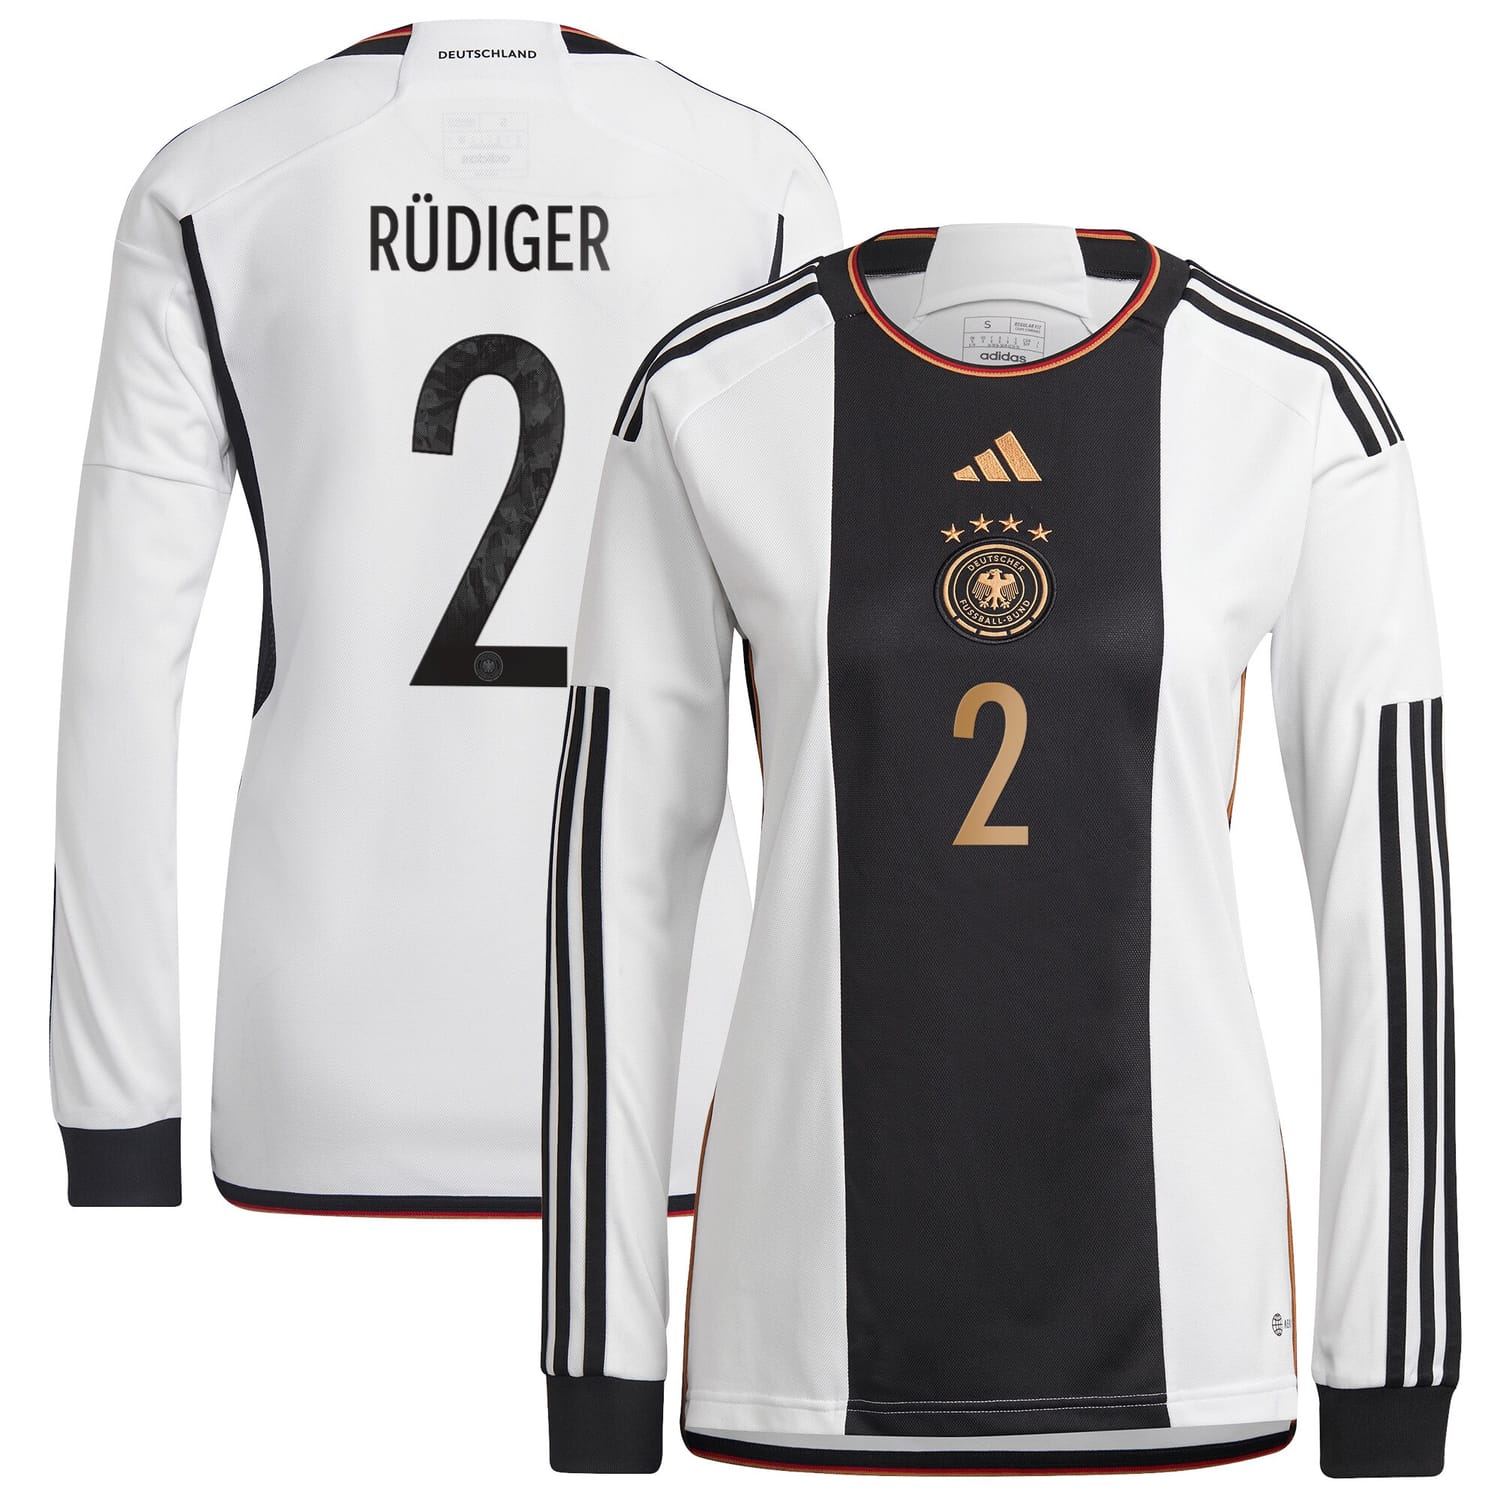 Germany National Team Home Jersey Shirt Long Sleeve player Antonio Rüdiger 2 printing for Women